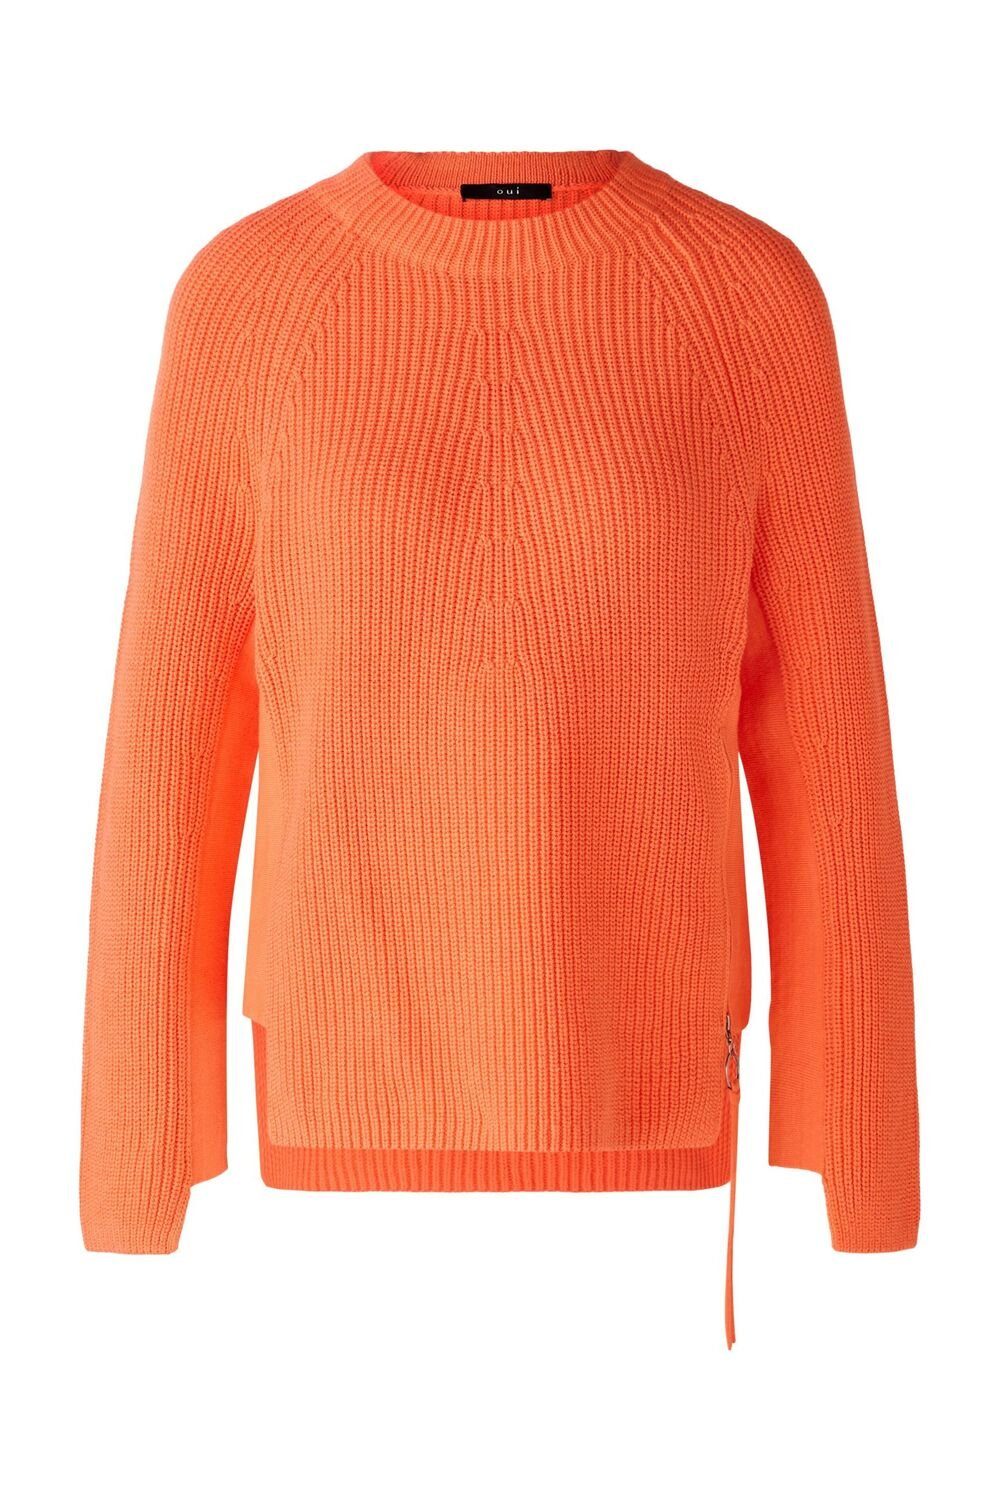 Sweatshirt coral Oui hot Pullover,